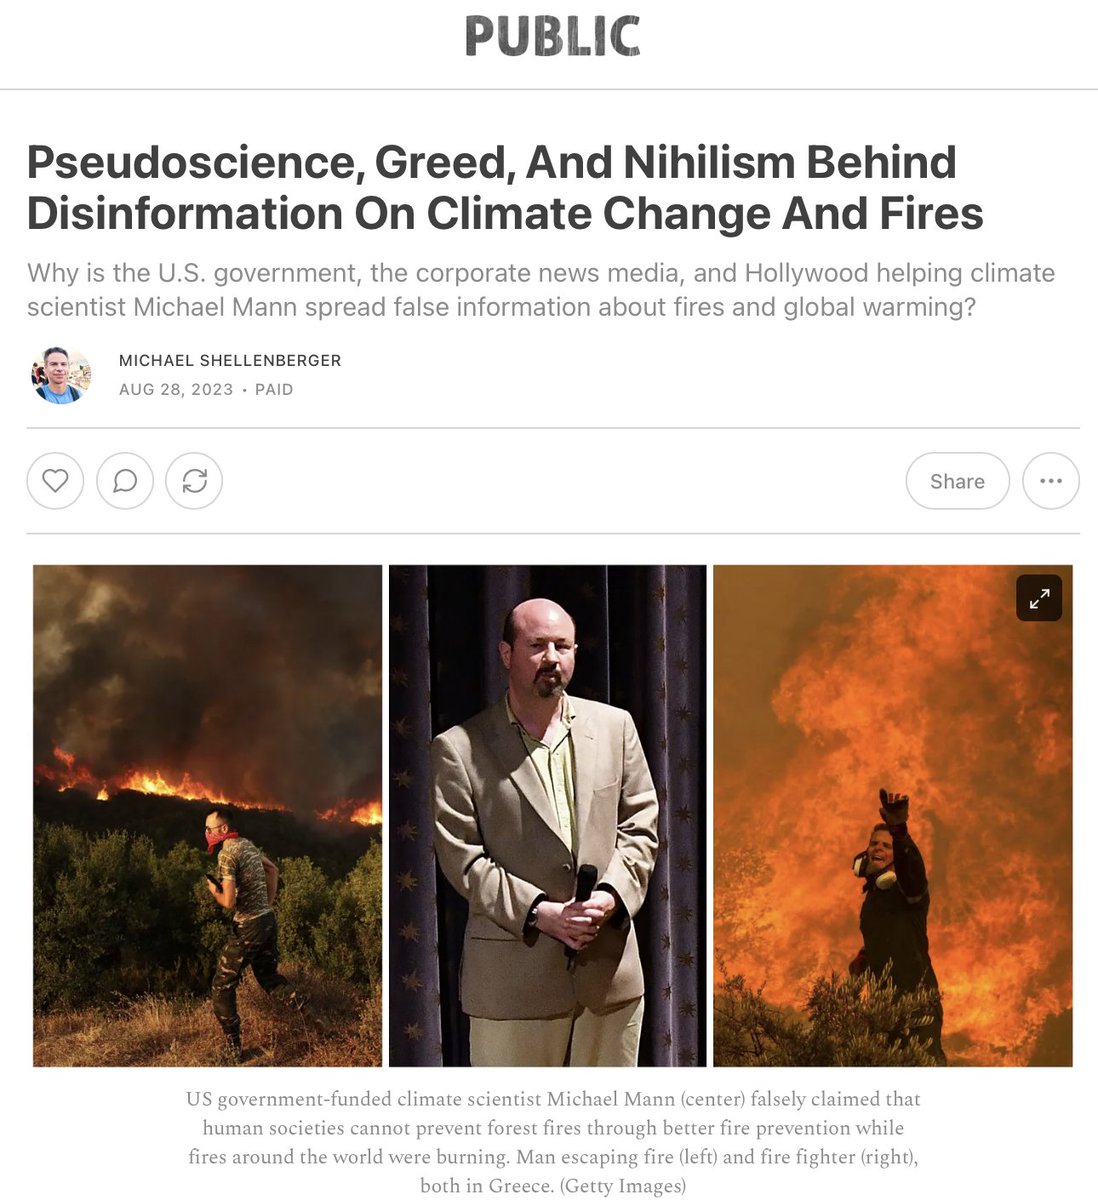 Politicians, scientists, and the media claim climate change is causing forest fires, but it's not. Arson, lack of forest management, and bad fire response are. The reason they blame climate change is because they're power-mad, greedy, and in the grip of an anti-human religion.